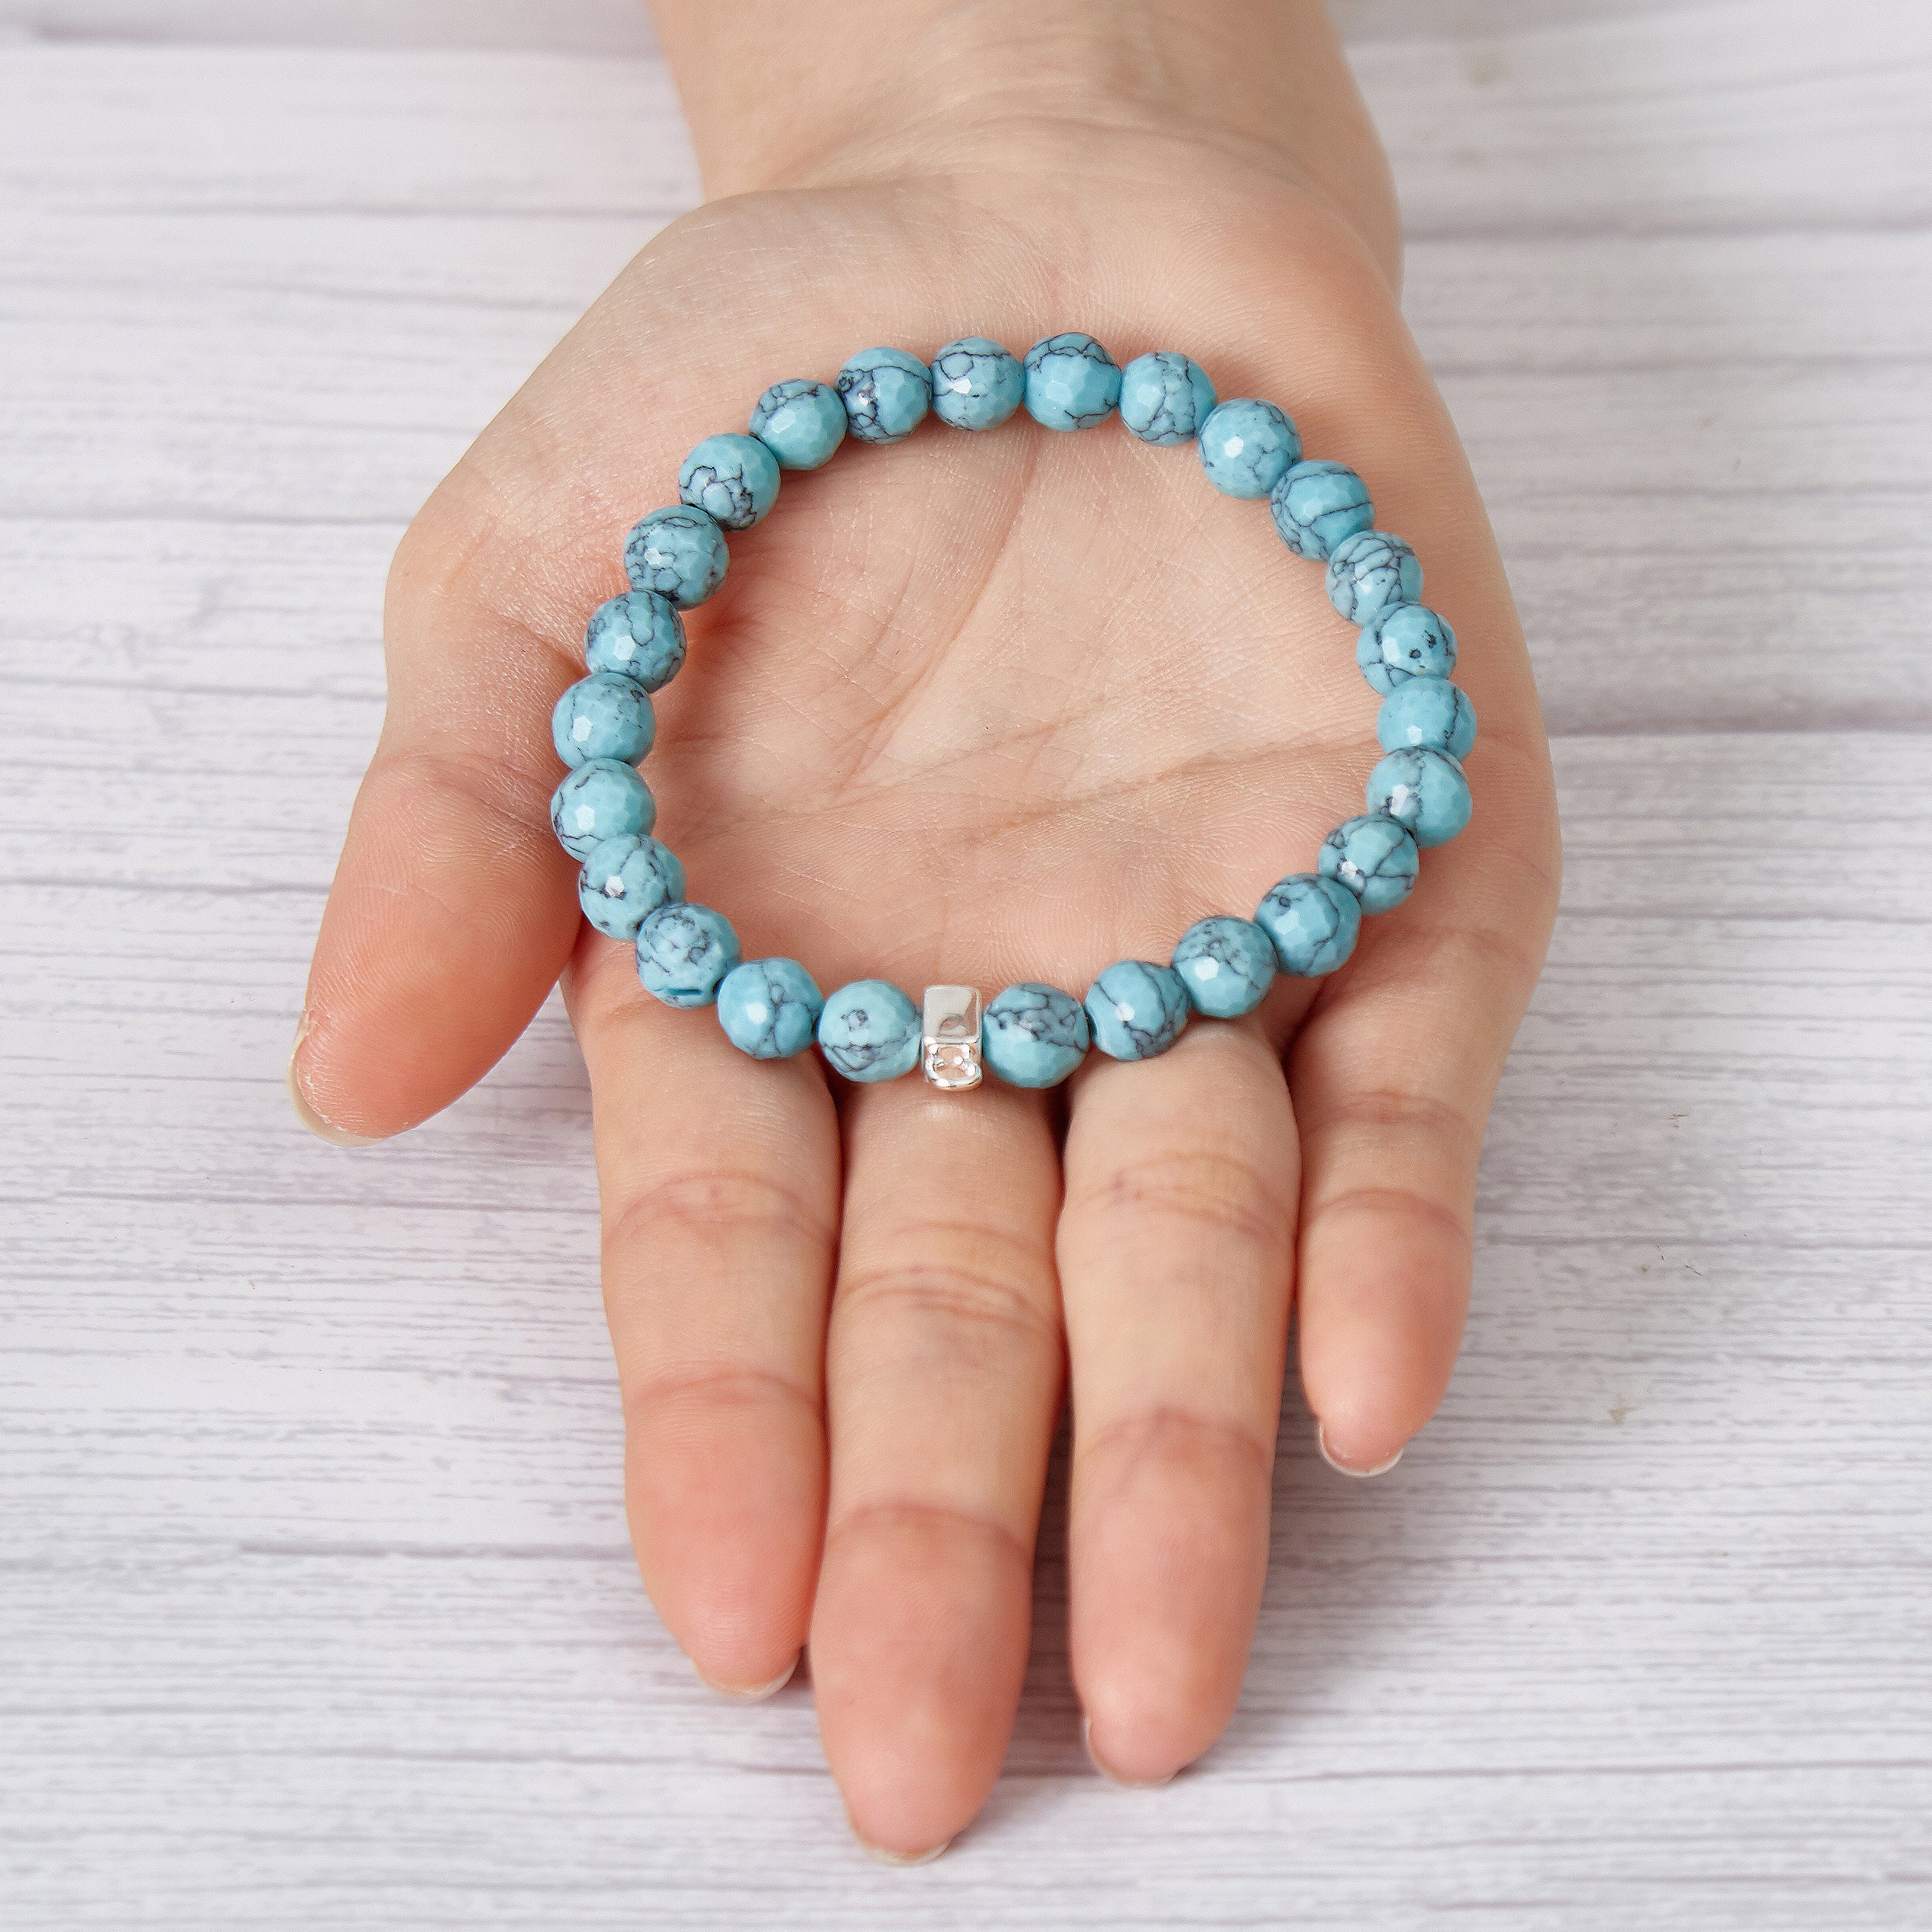 Faceted Synthetic Turquoise Gemstone Charm Stretch Bracelet